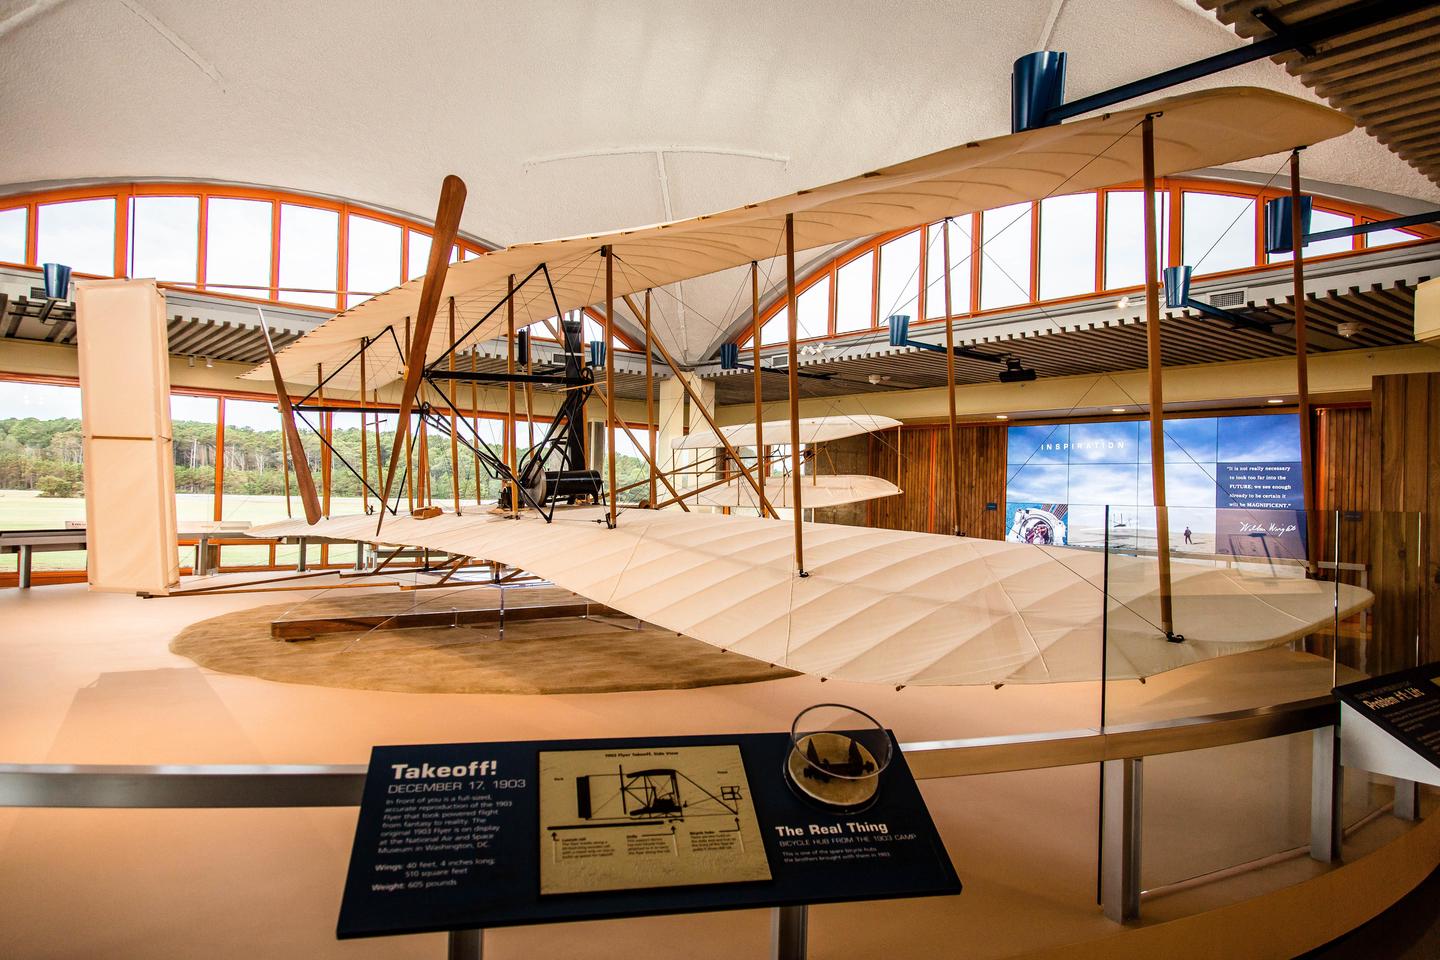 flight roomA replica of the 1903 flyer is on display in the Flight Room, helping bring this amazing moment to life.